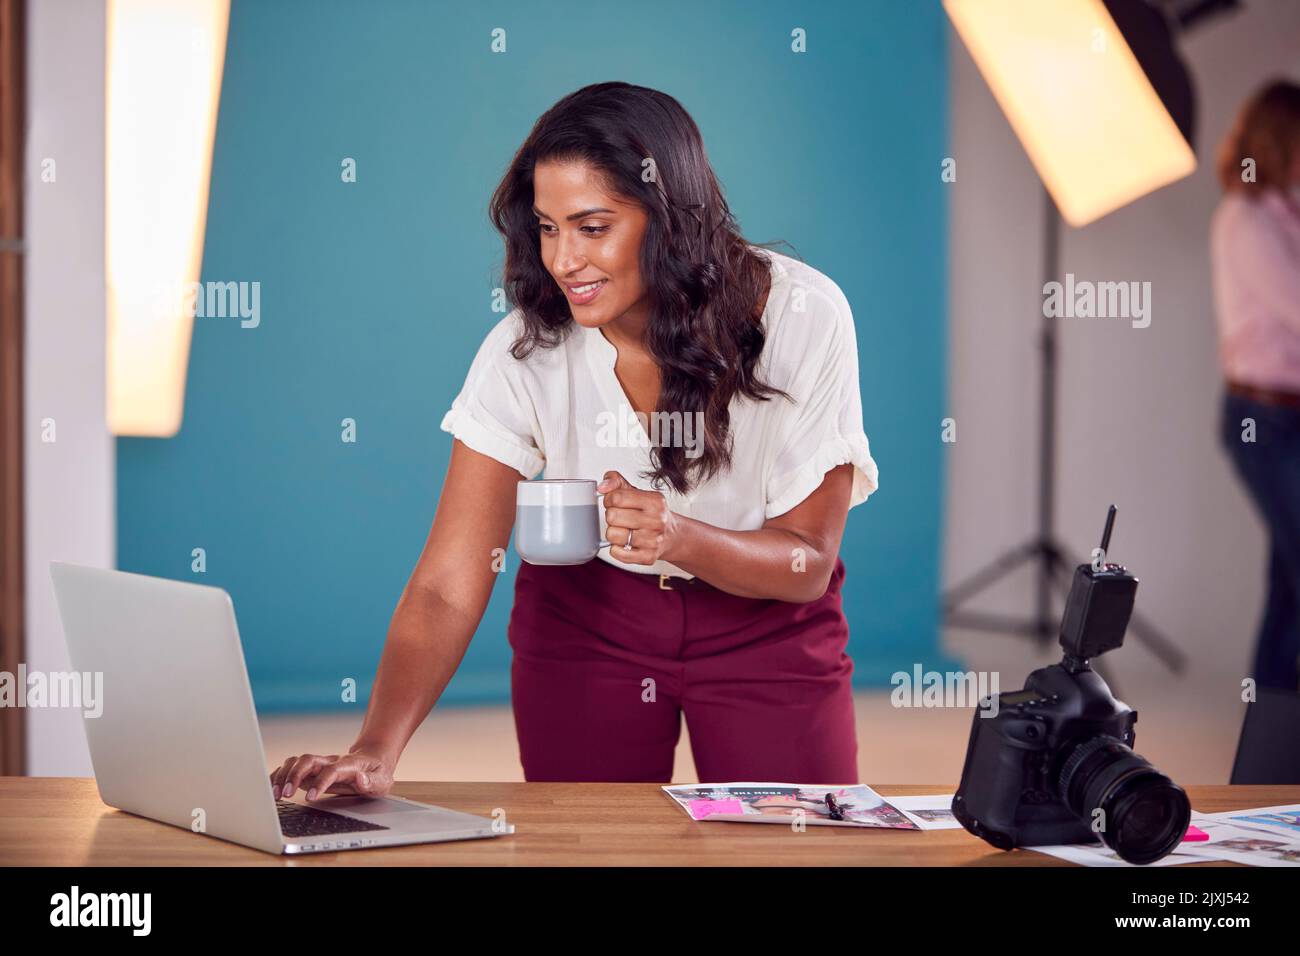 Mature Female Photographer Checking Images On Laptop During Shoot In Studio Stock Photo